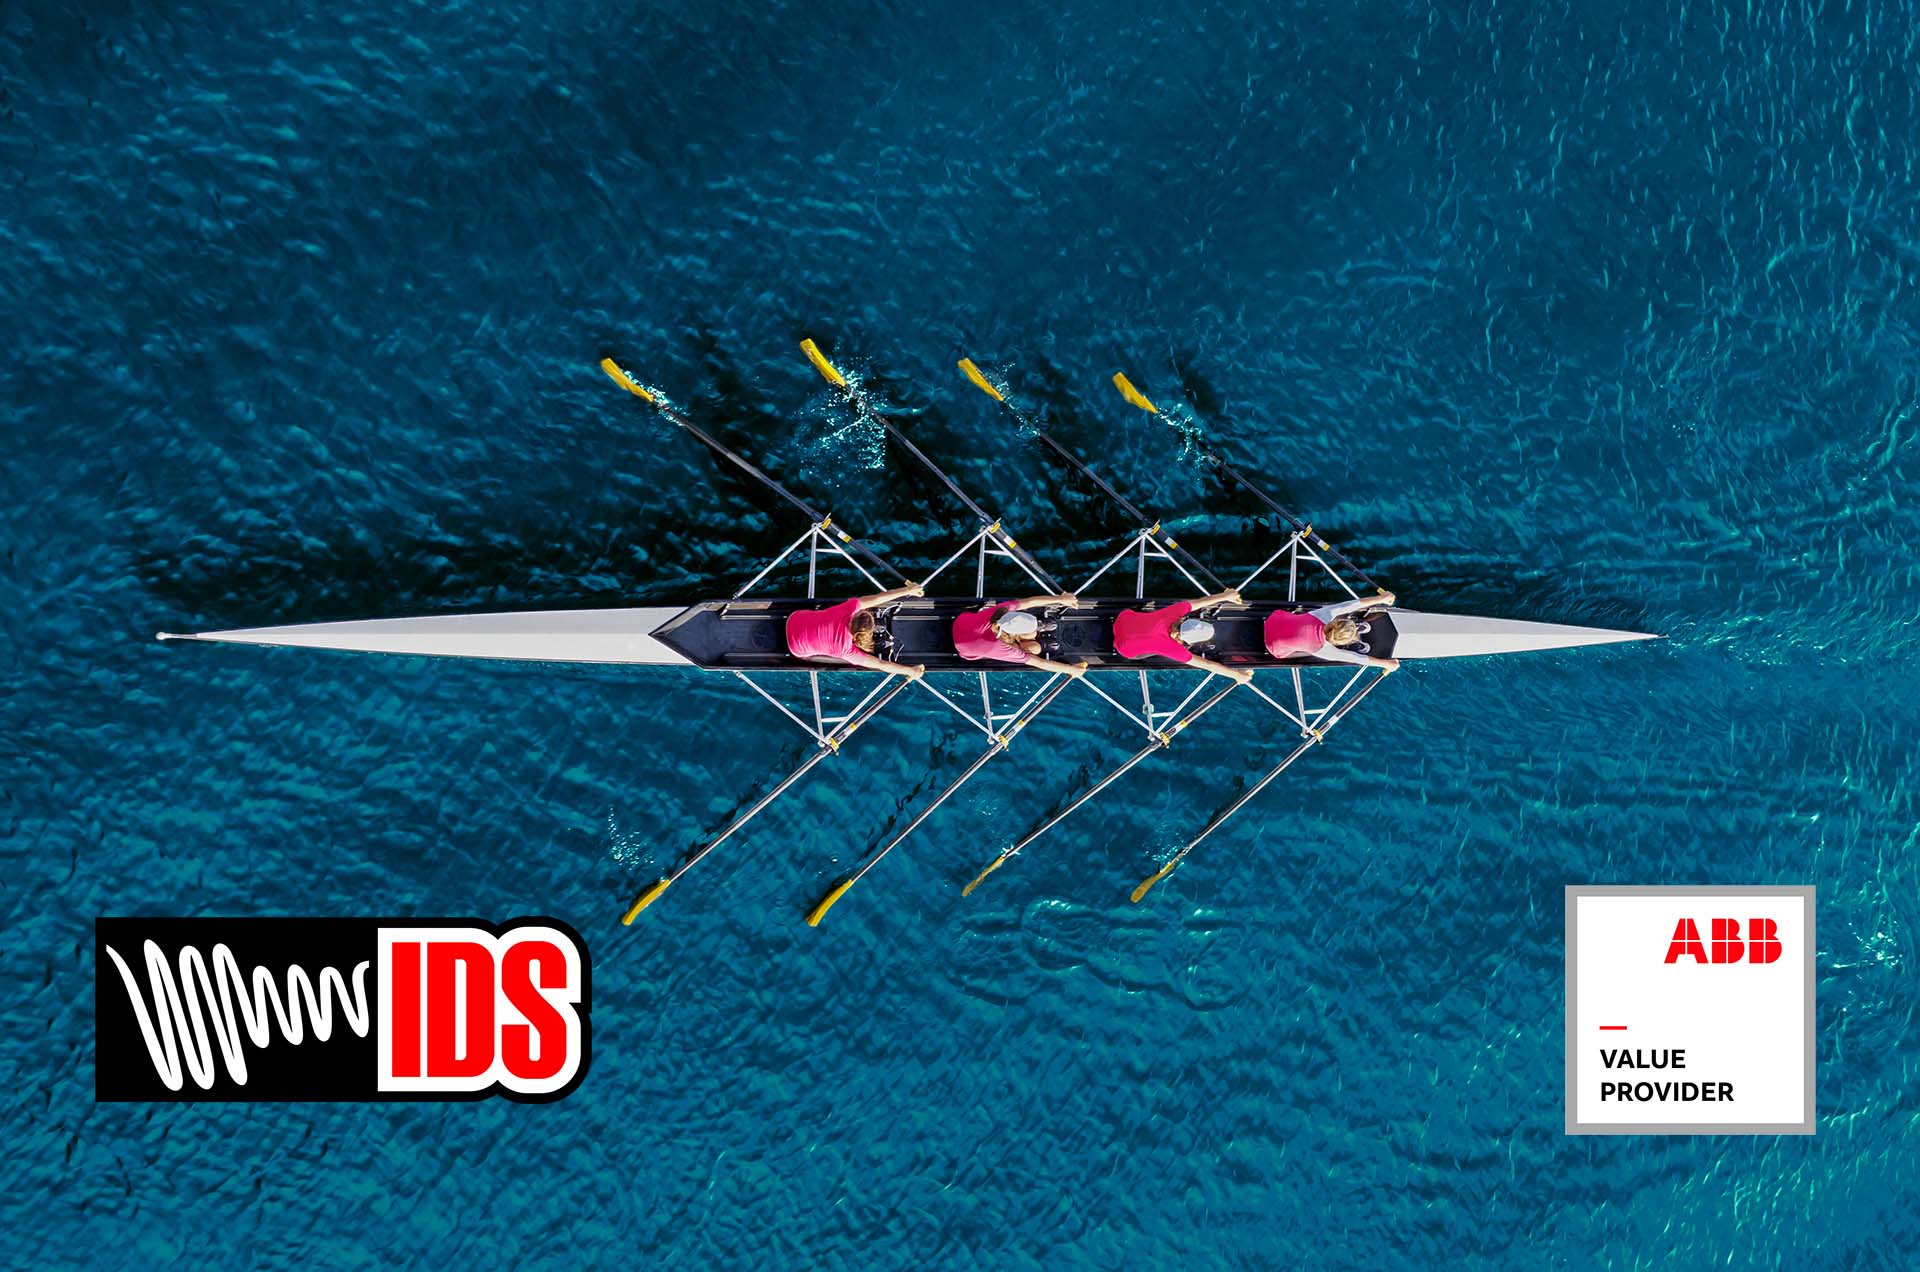 Why Choose an ABB Value Provider - image shows a rowing team working together seamlessly and the ABB and IDS logos